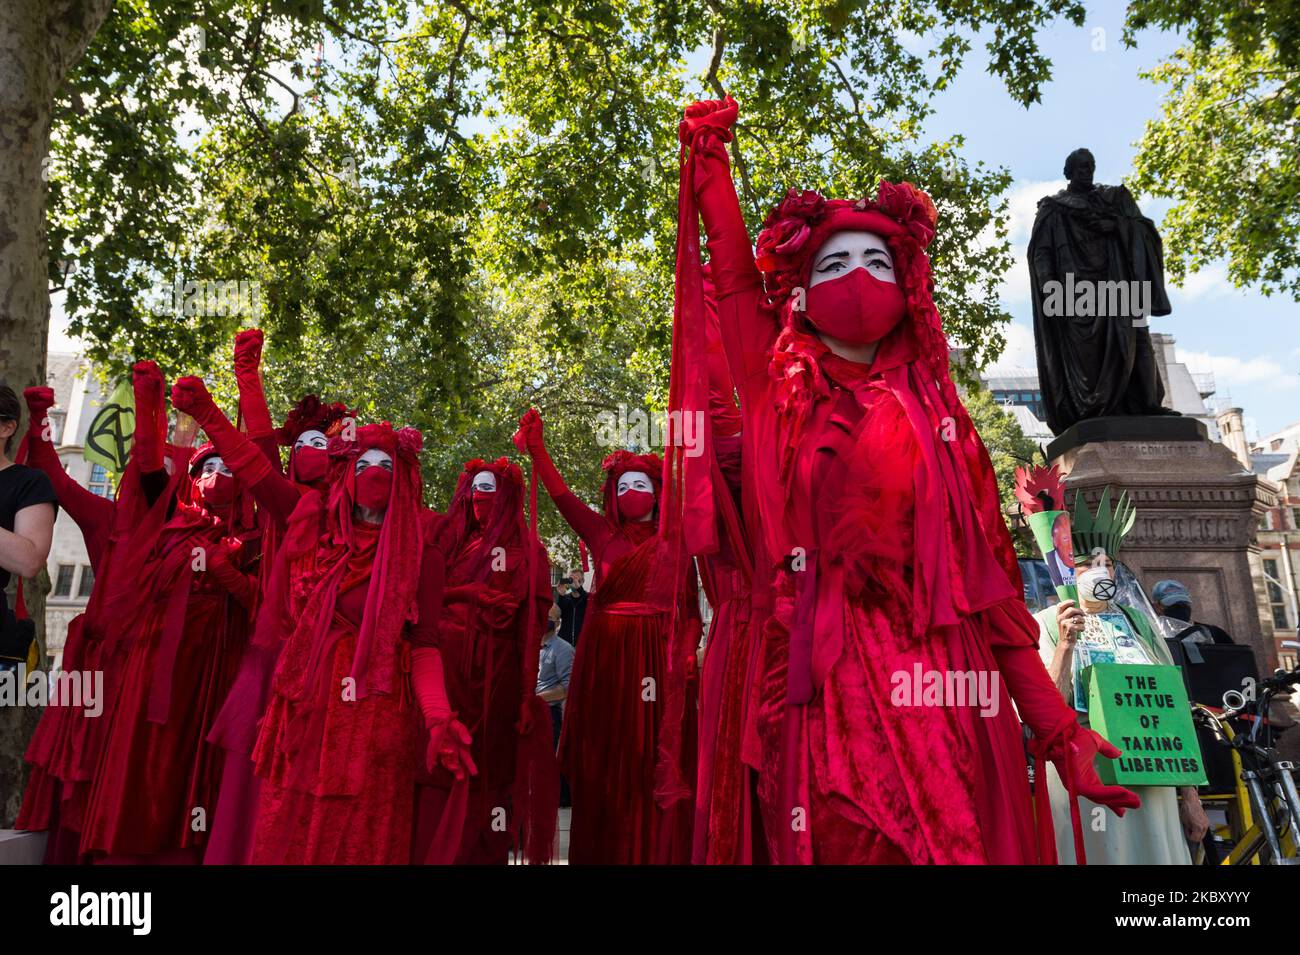 Members of the XR Red Brigade join environmental activists from Extinction Rebellion in Parliament Square on the first day of protest action in support of the Climate and Ecological Emergency Bill, as MPs return to the Commons after the summer recess on 01 September, 2020 in London, England. Extinction Rebellion plan to block streets in London, Manchester and Cardiff over 10 days as they call on MPs to support an innitiative for climate emergency bill, which would speed up the UK’s progress on reducing its carbon emissions, and hold a national citizens’ assembly on the crisis. (Photo by WIktor Stock Photo